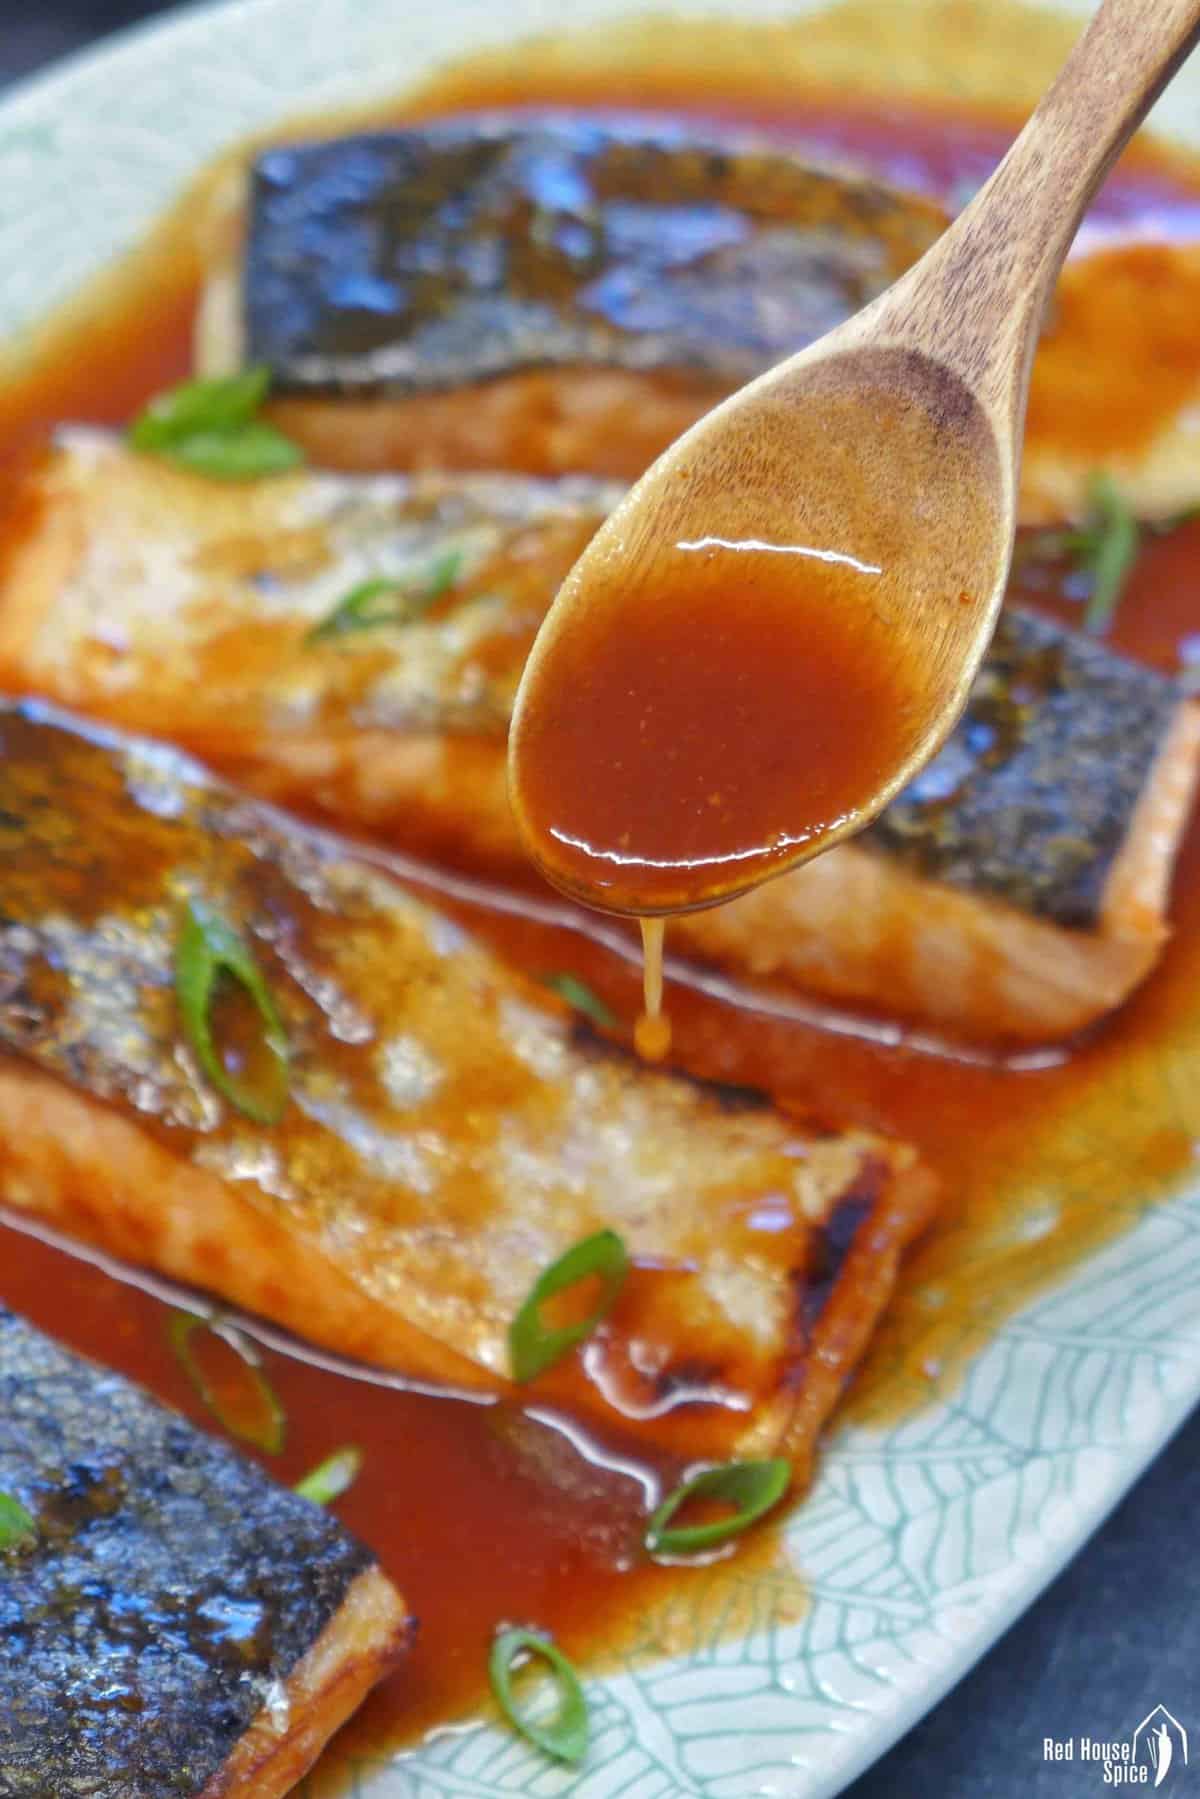 adding sweet and sour sauce to roast salmon filets.